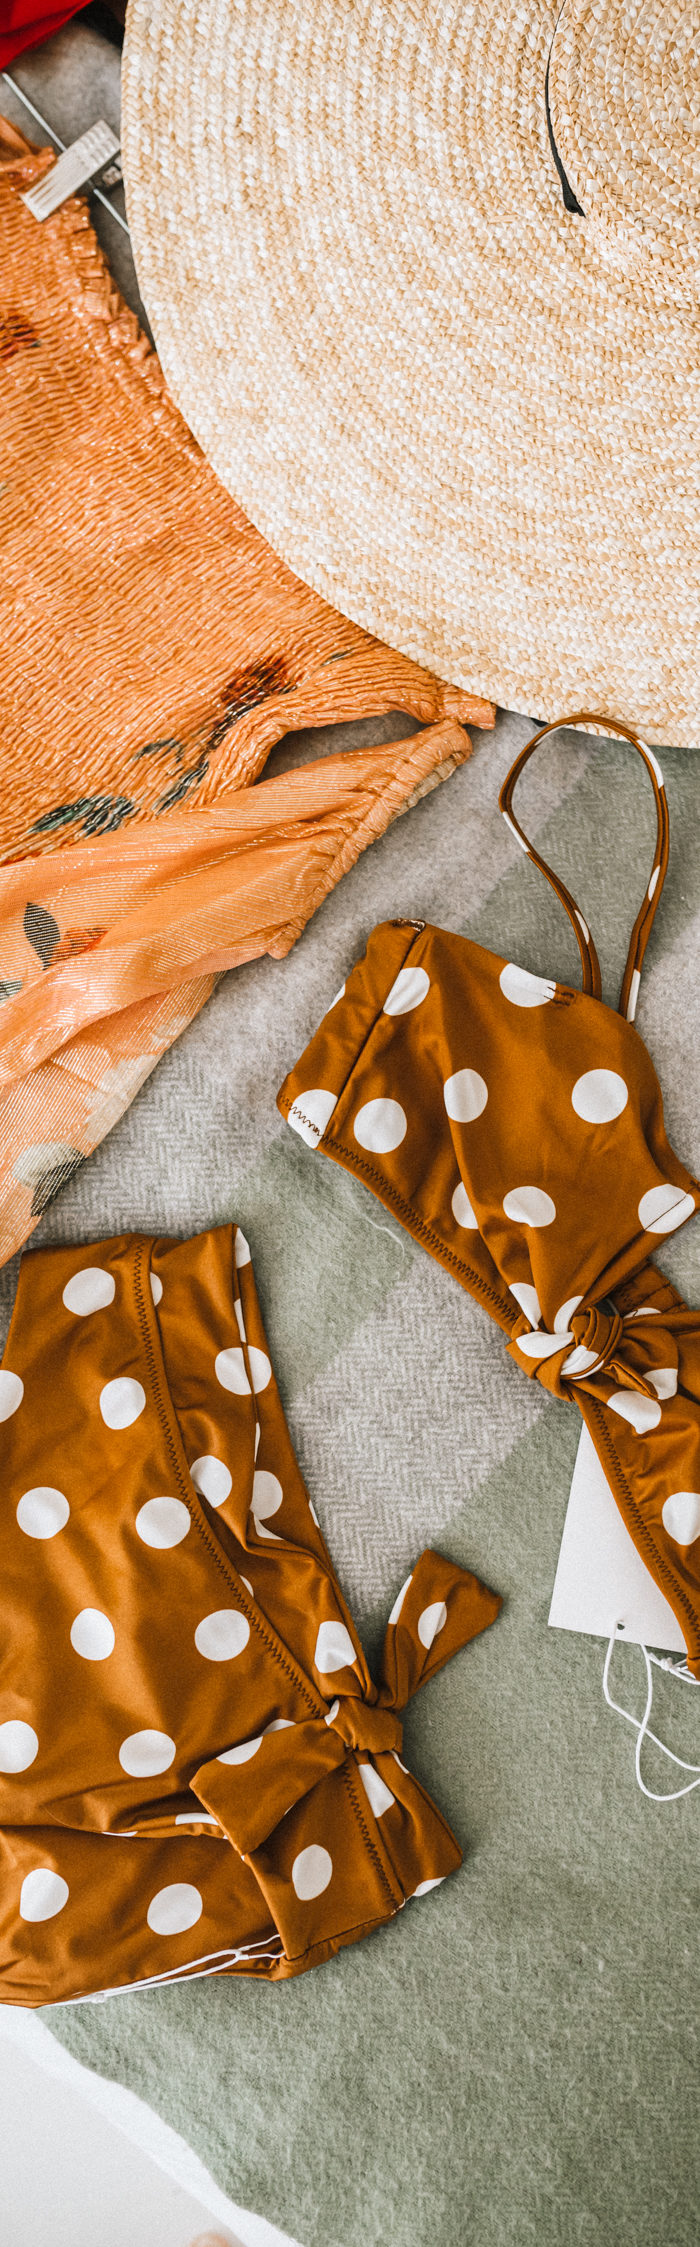 Former Miss USA 2011 Alyssa Campanella of The A List blog shares her Cayman Islands packing list with Rococo Sand off the shoulder dress and Sidway polka dot swimsuit